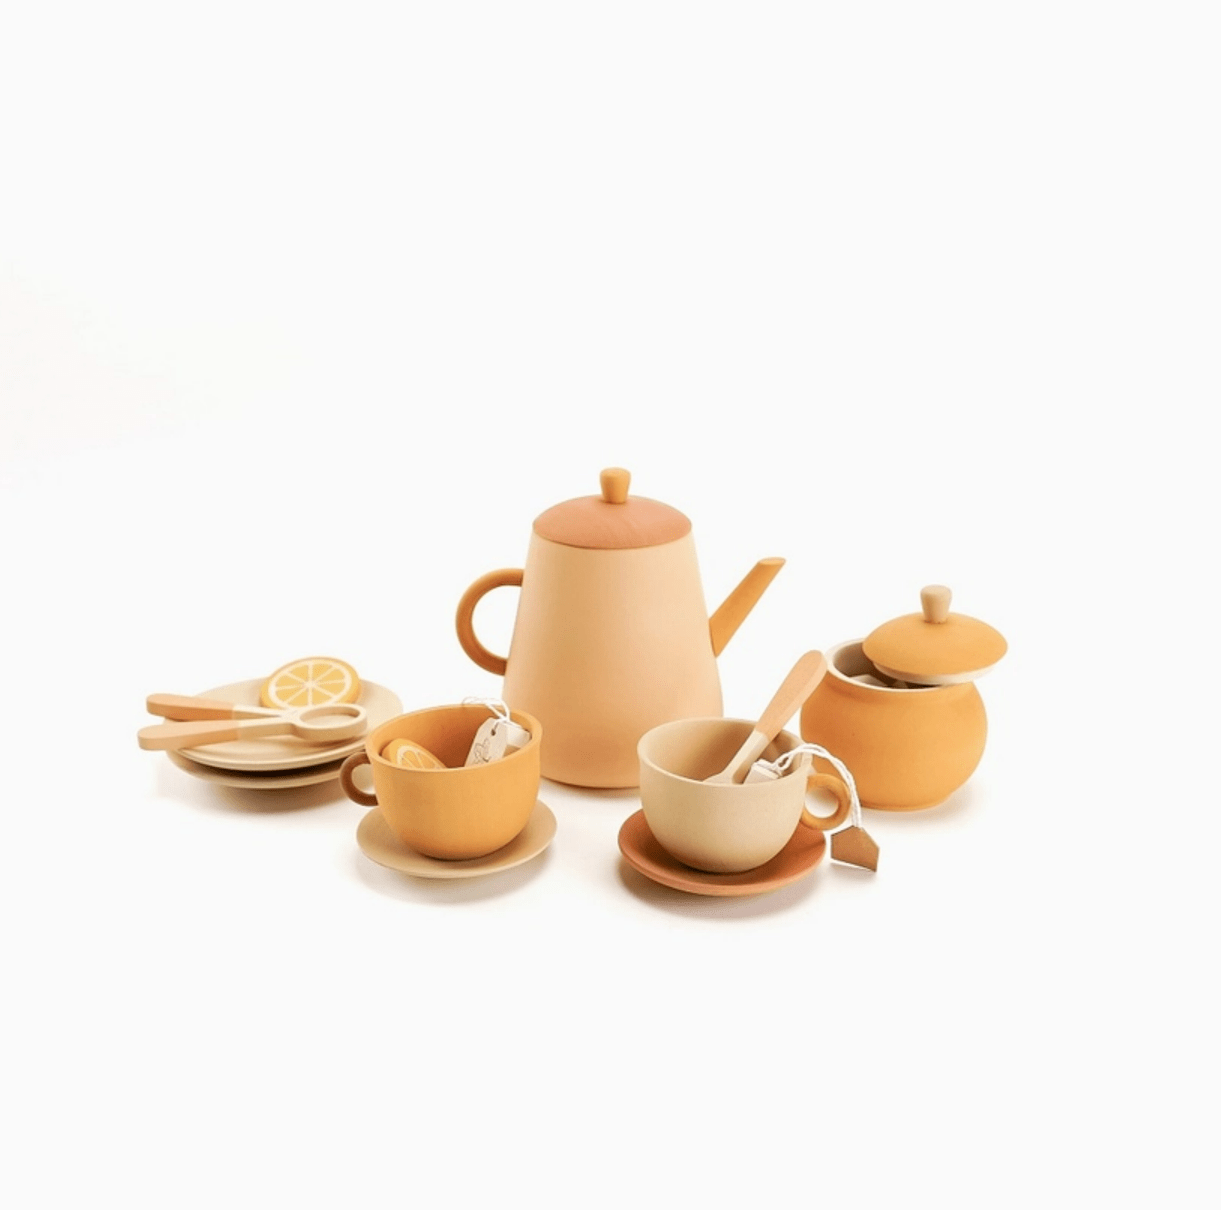 Sabo Concept Pretend Play Handmade Wooden Tea Set (Flower) by Sabo Concept Handmade Wooden Toy Pizza I Eco-Friendly Pretend Play Pizza Toy for Kids